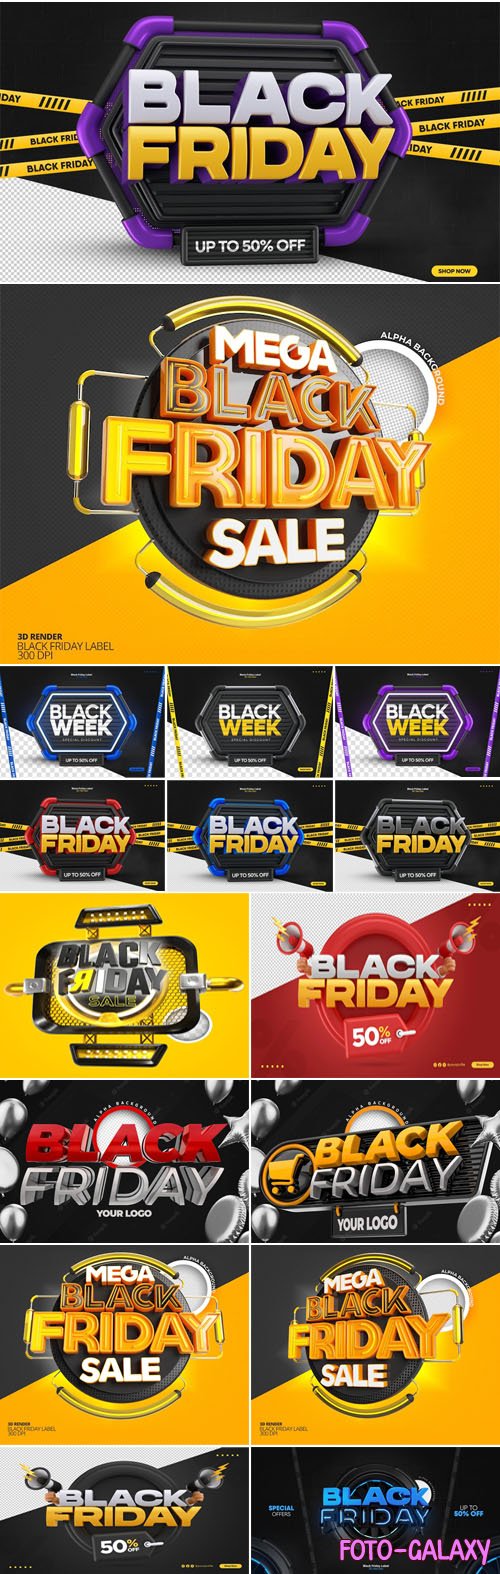 Black Friday - 20+ Super Sale 3D Renders PSD Templates Collection